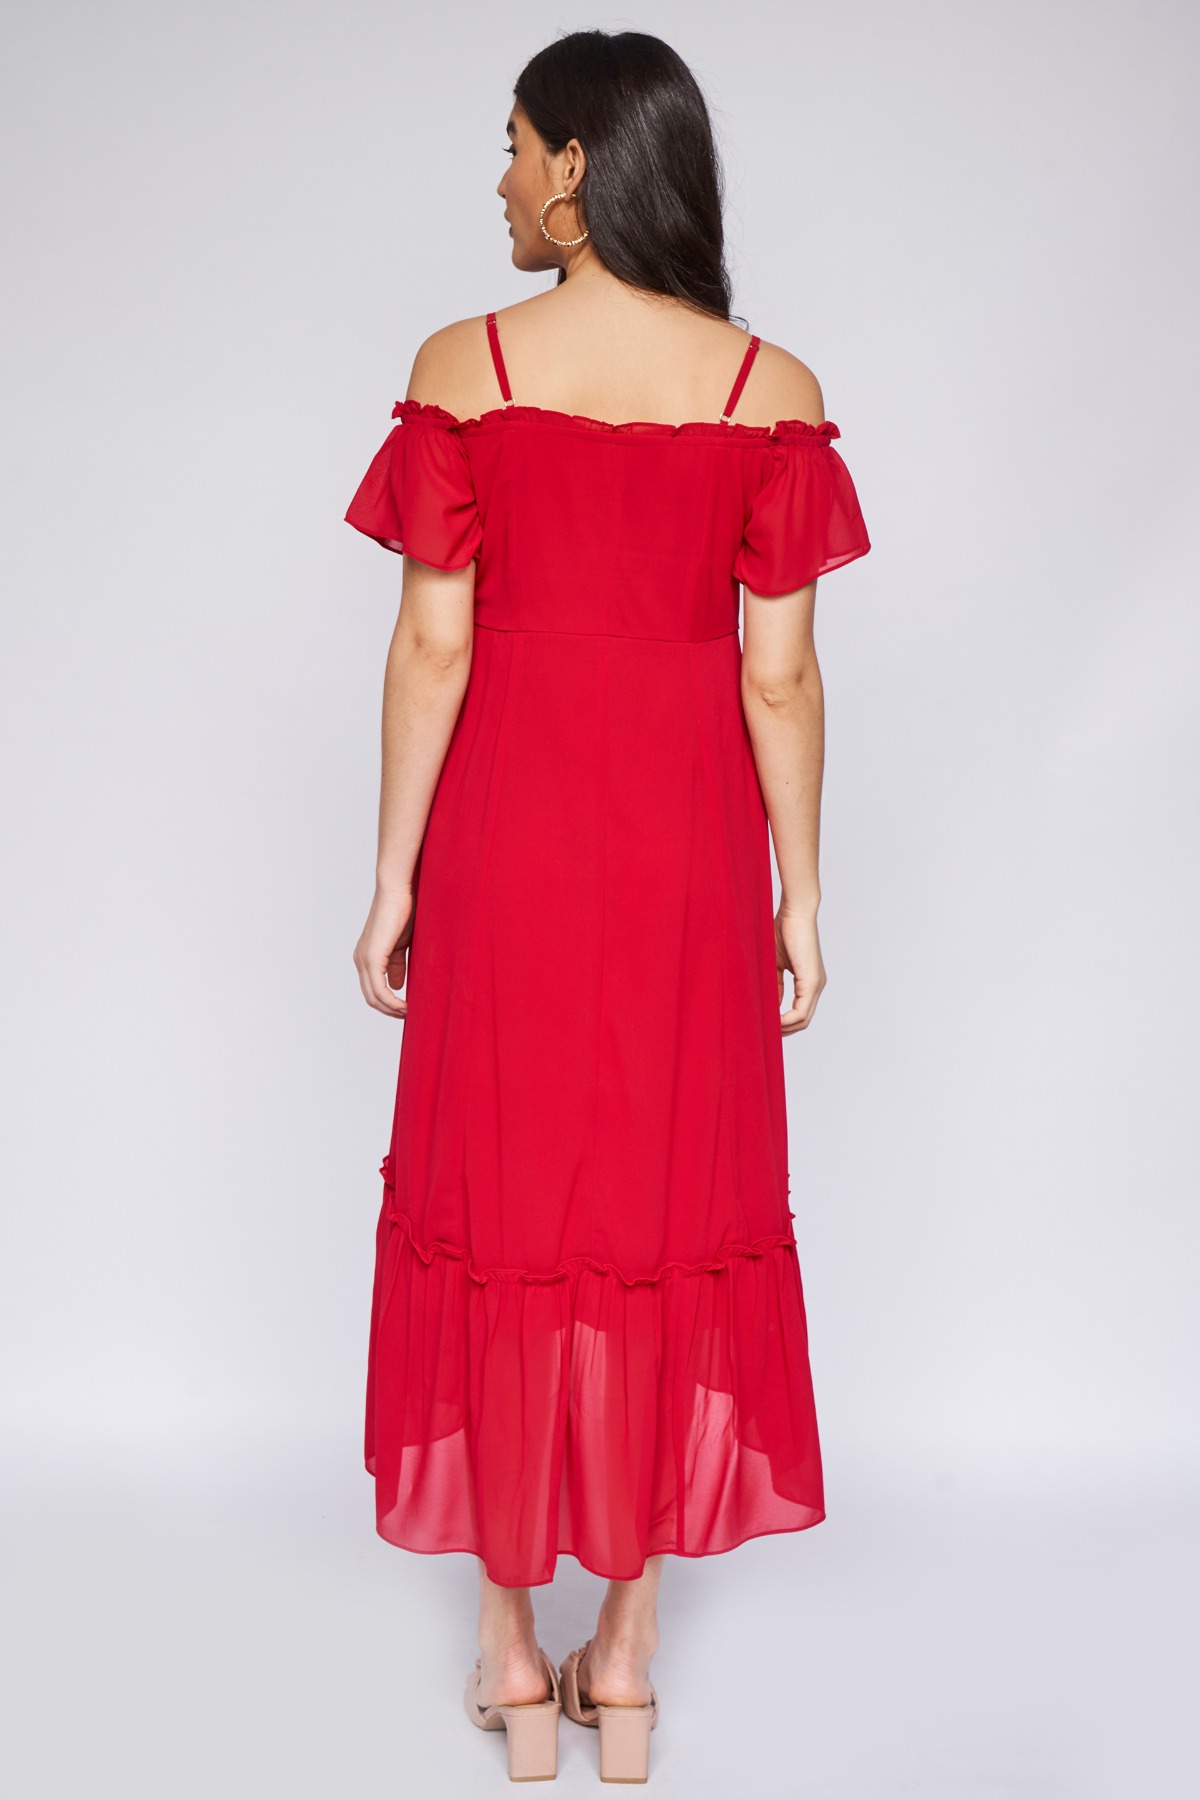 5 - Red Solid Fit & Flare Gown, image 5